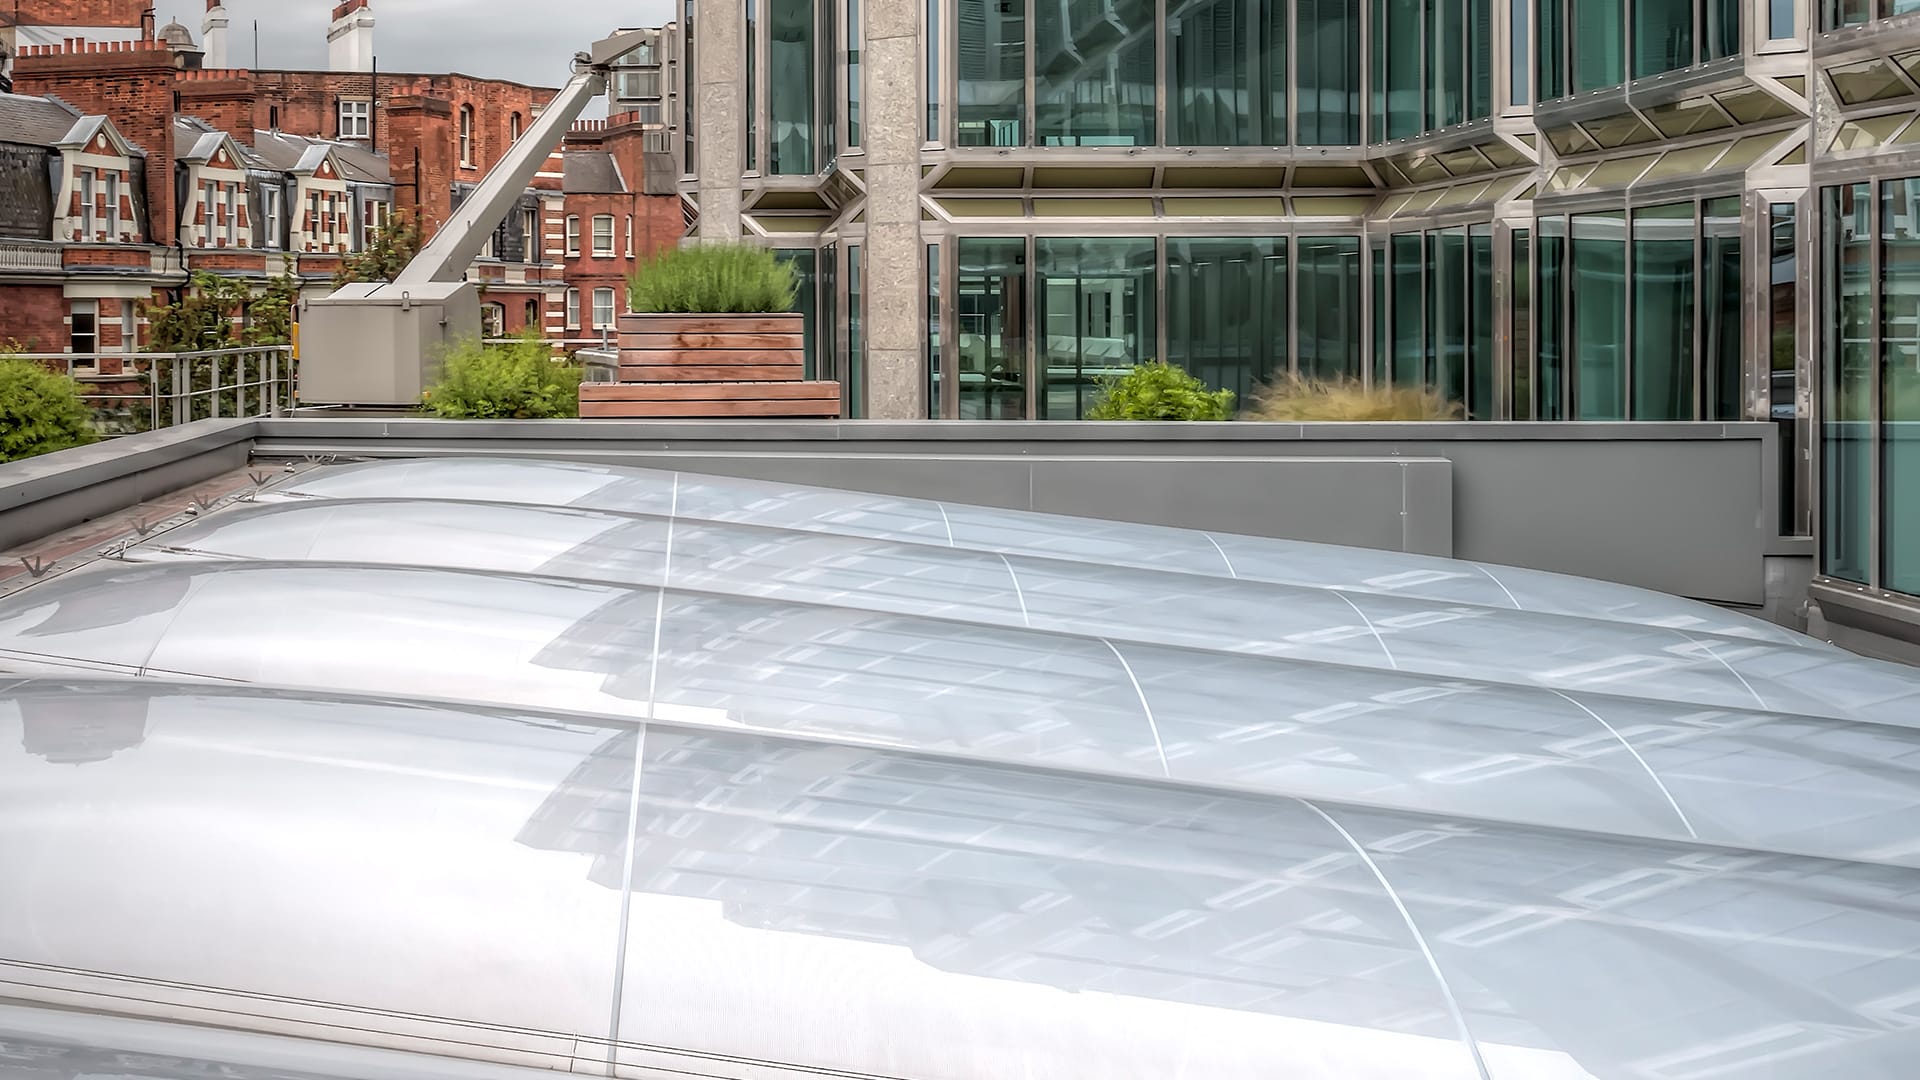 123 Victoria Street is a stunning new refurbishment project in the heart of London’s Victoria Street with a Texlon ETFE atrium roof.